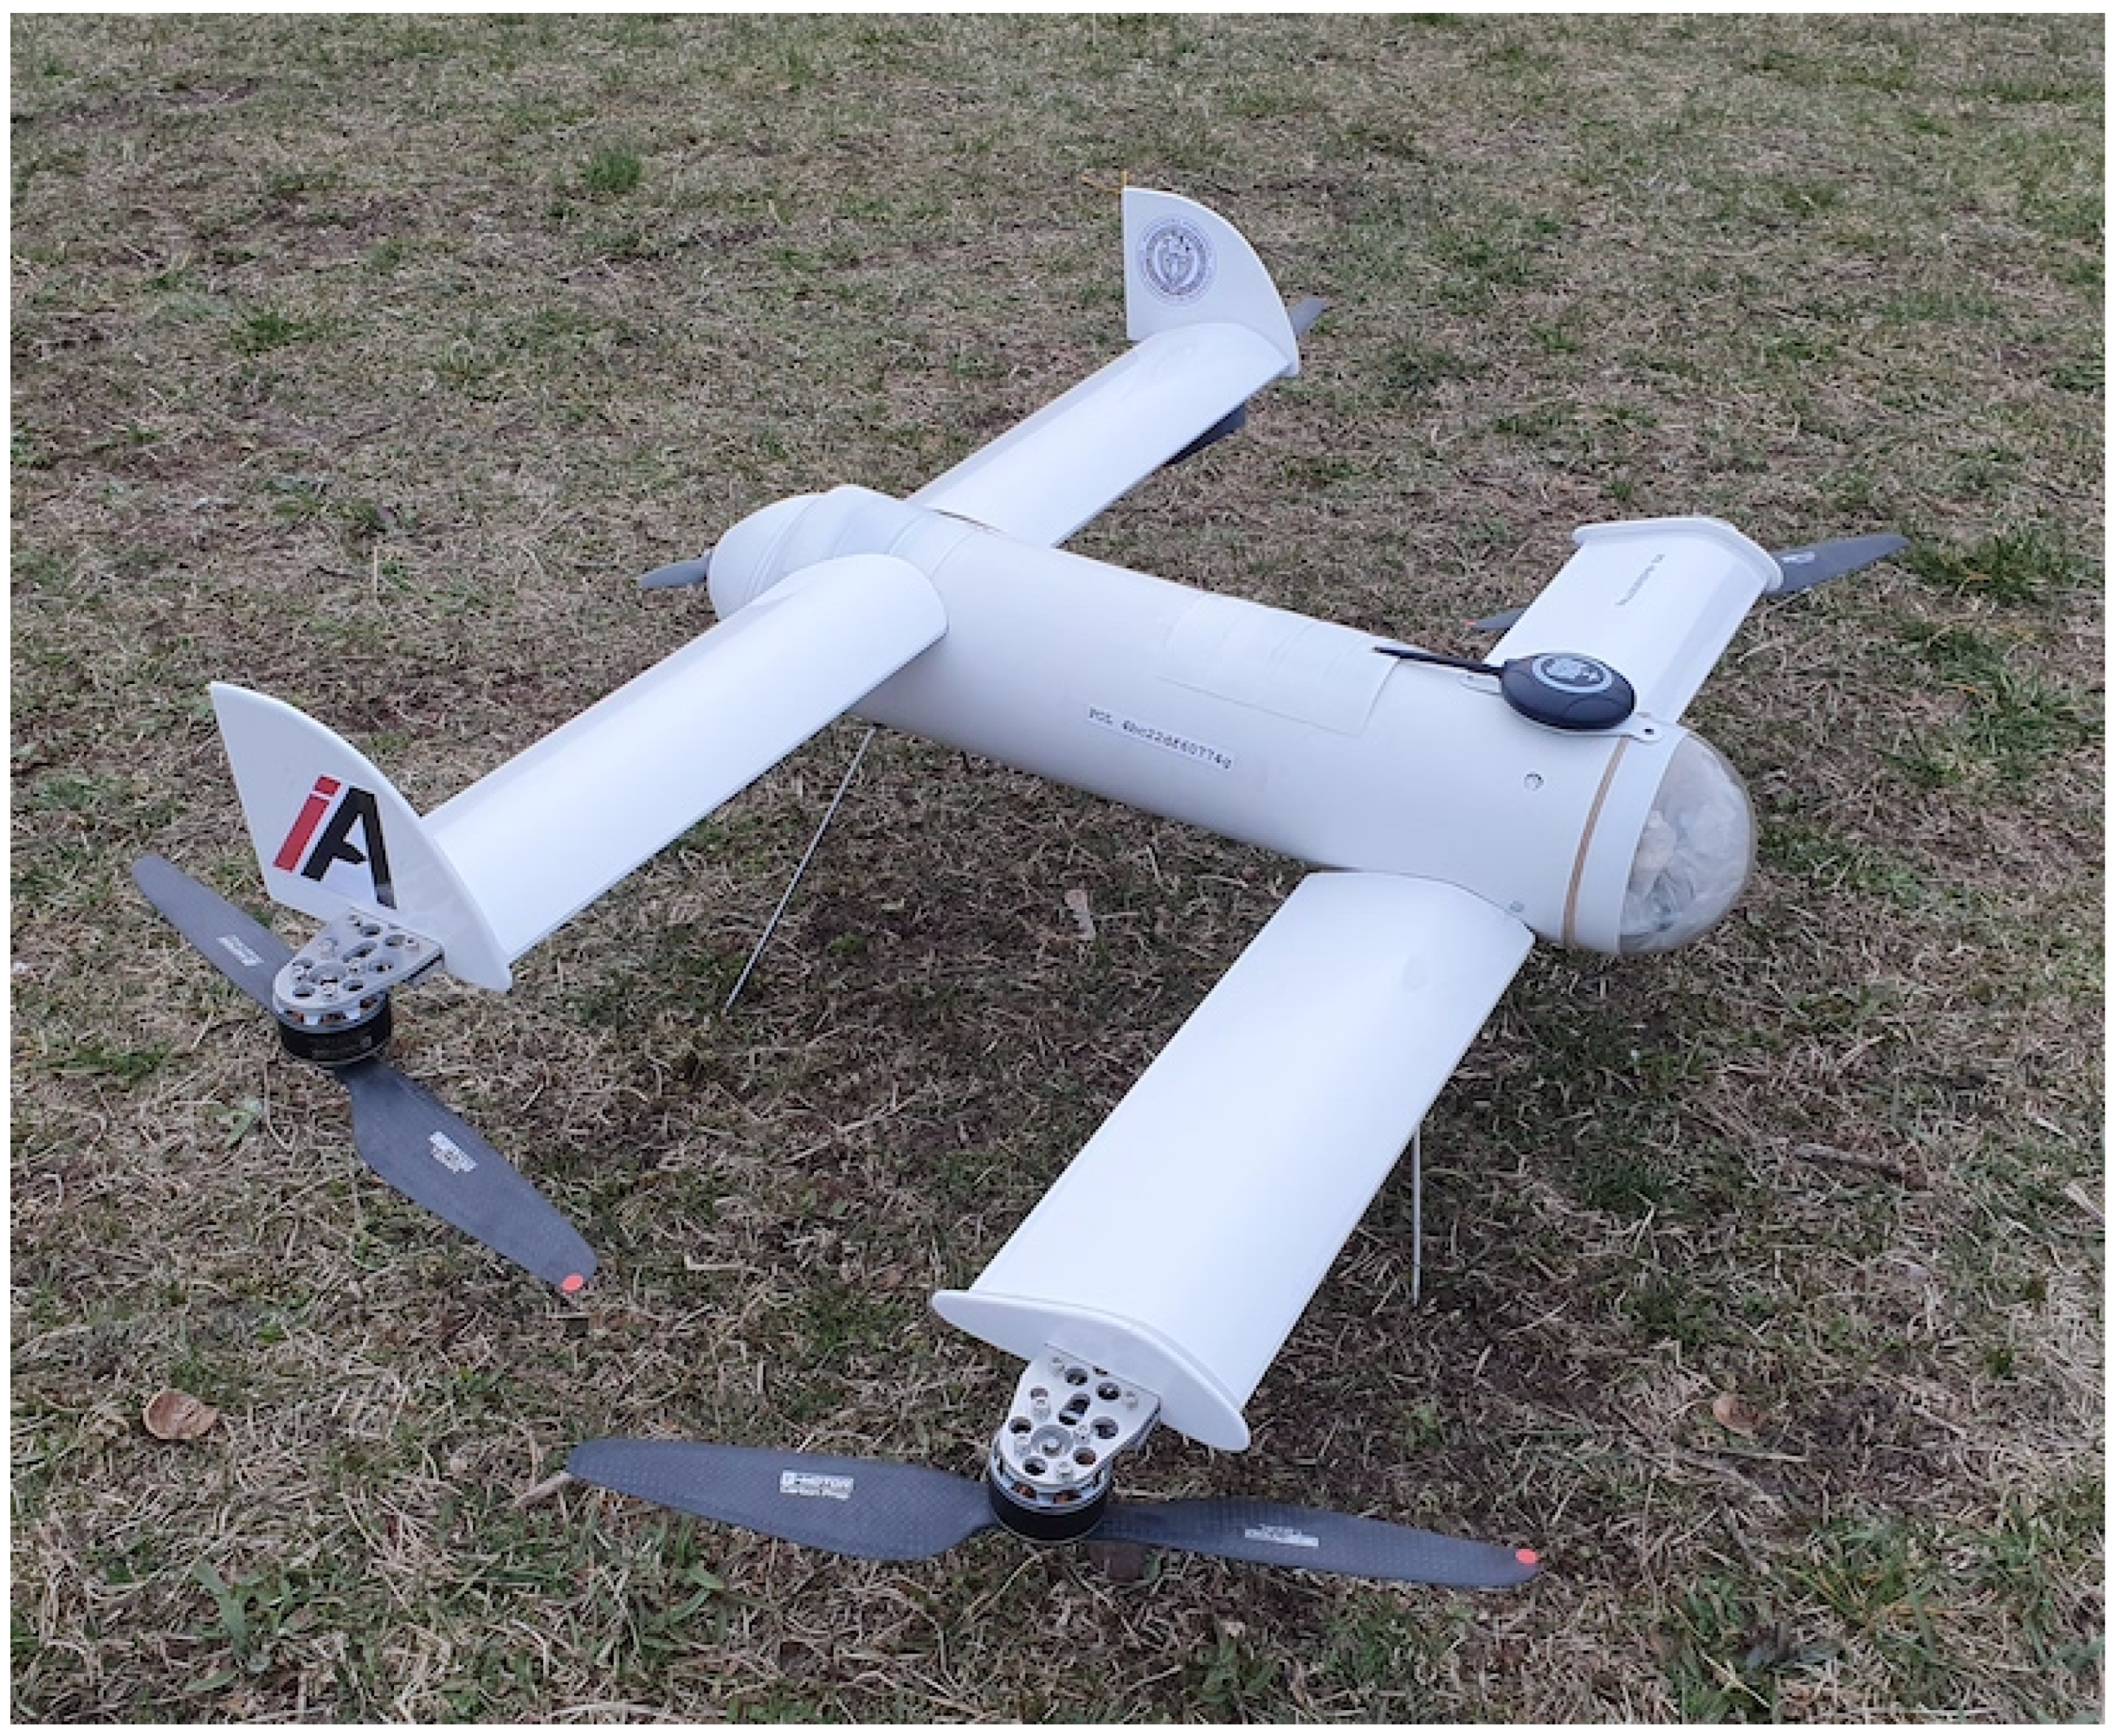 Applied Sciences | Free Full-Text | A Small UAV Optimized for Efficient  Long-Range and VTOL Missions: An Experimental Tandem-Wing Quadplane Drone